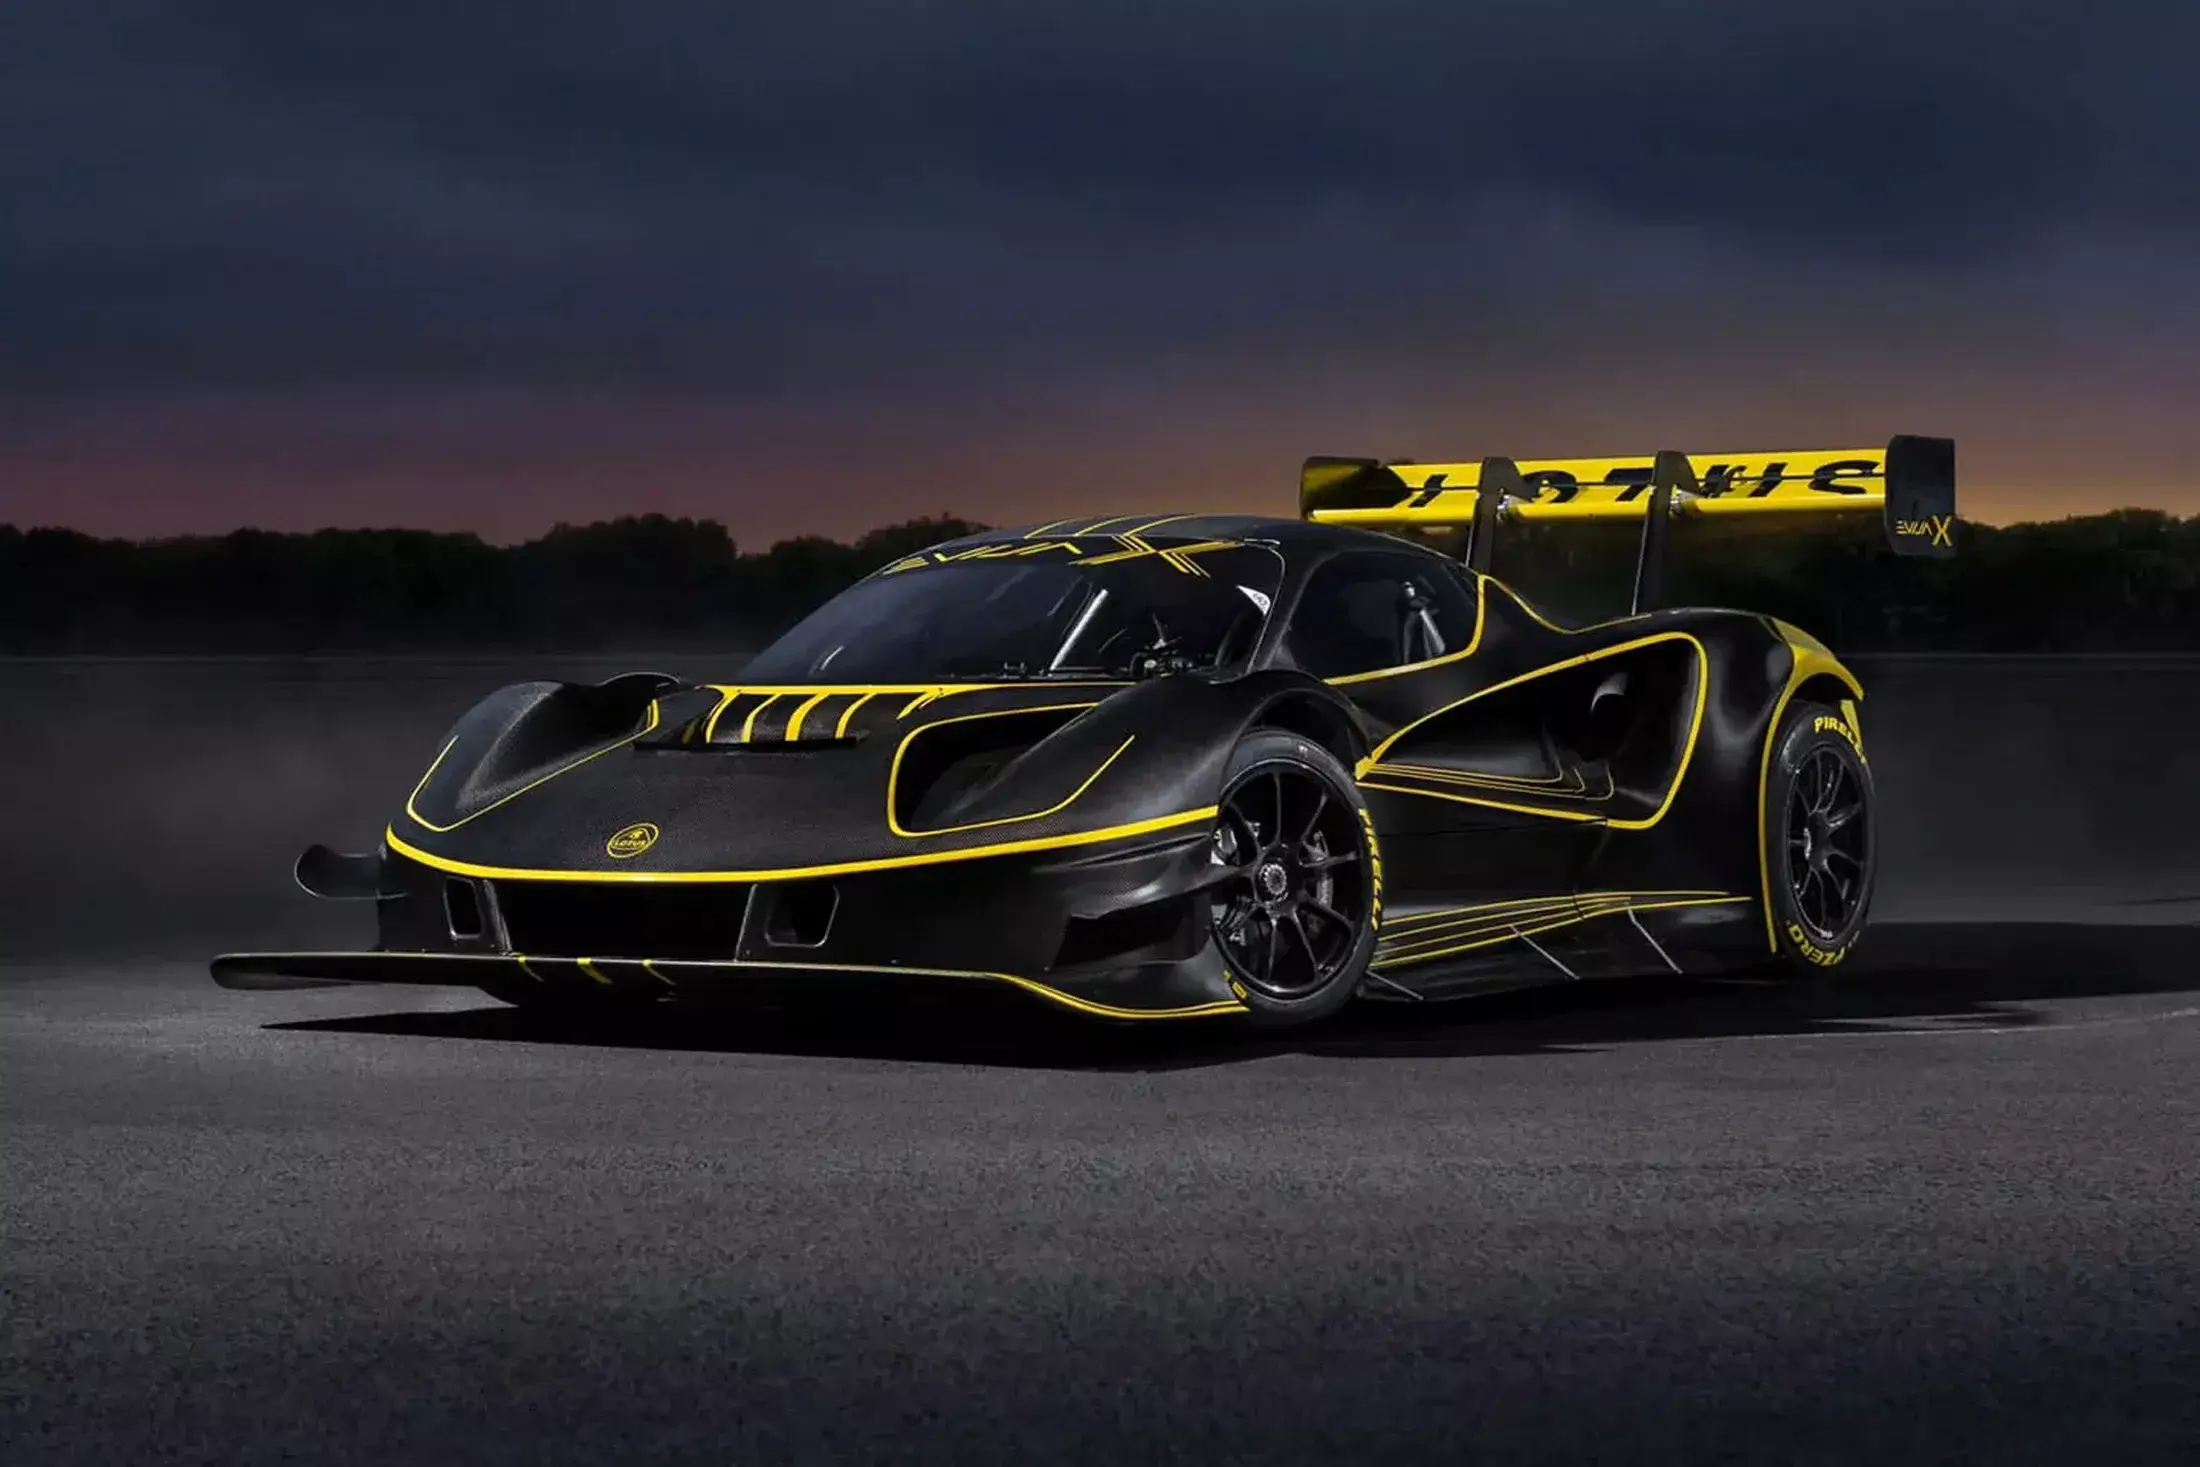 Lotus has built an extreme electric hypercar Evija X for the Nurburgring